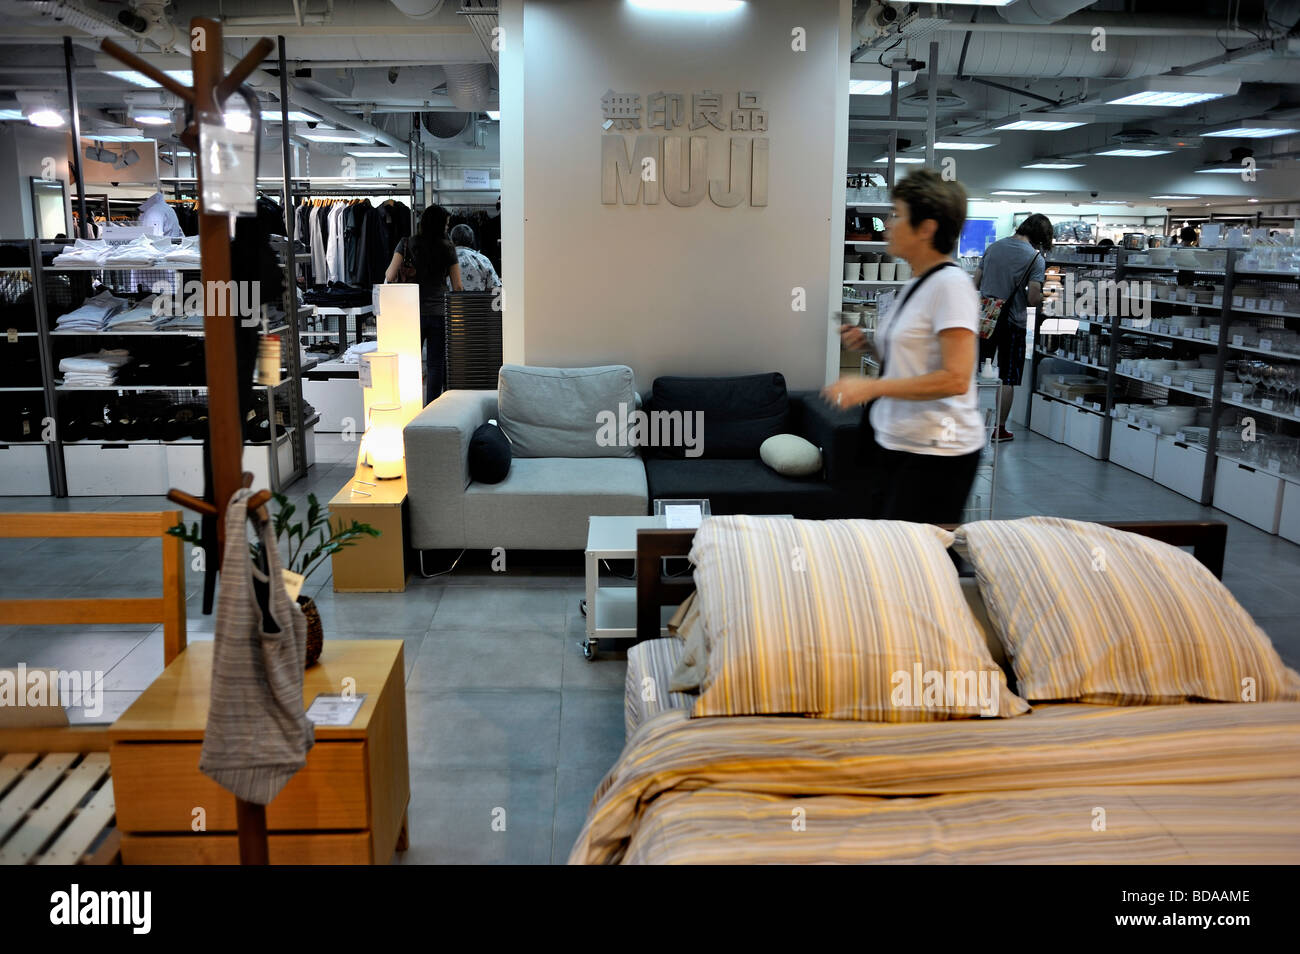 Paris France, Japanese Household Supplies Store, interior Muji, in 'Les Halles' Shopping Center Woman, contemporary retail interior design Stock Photo